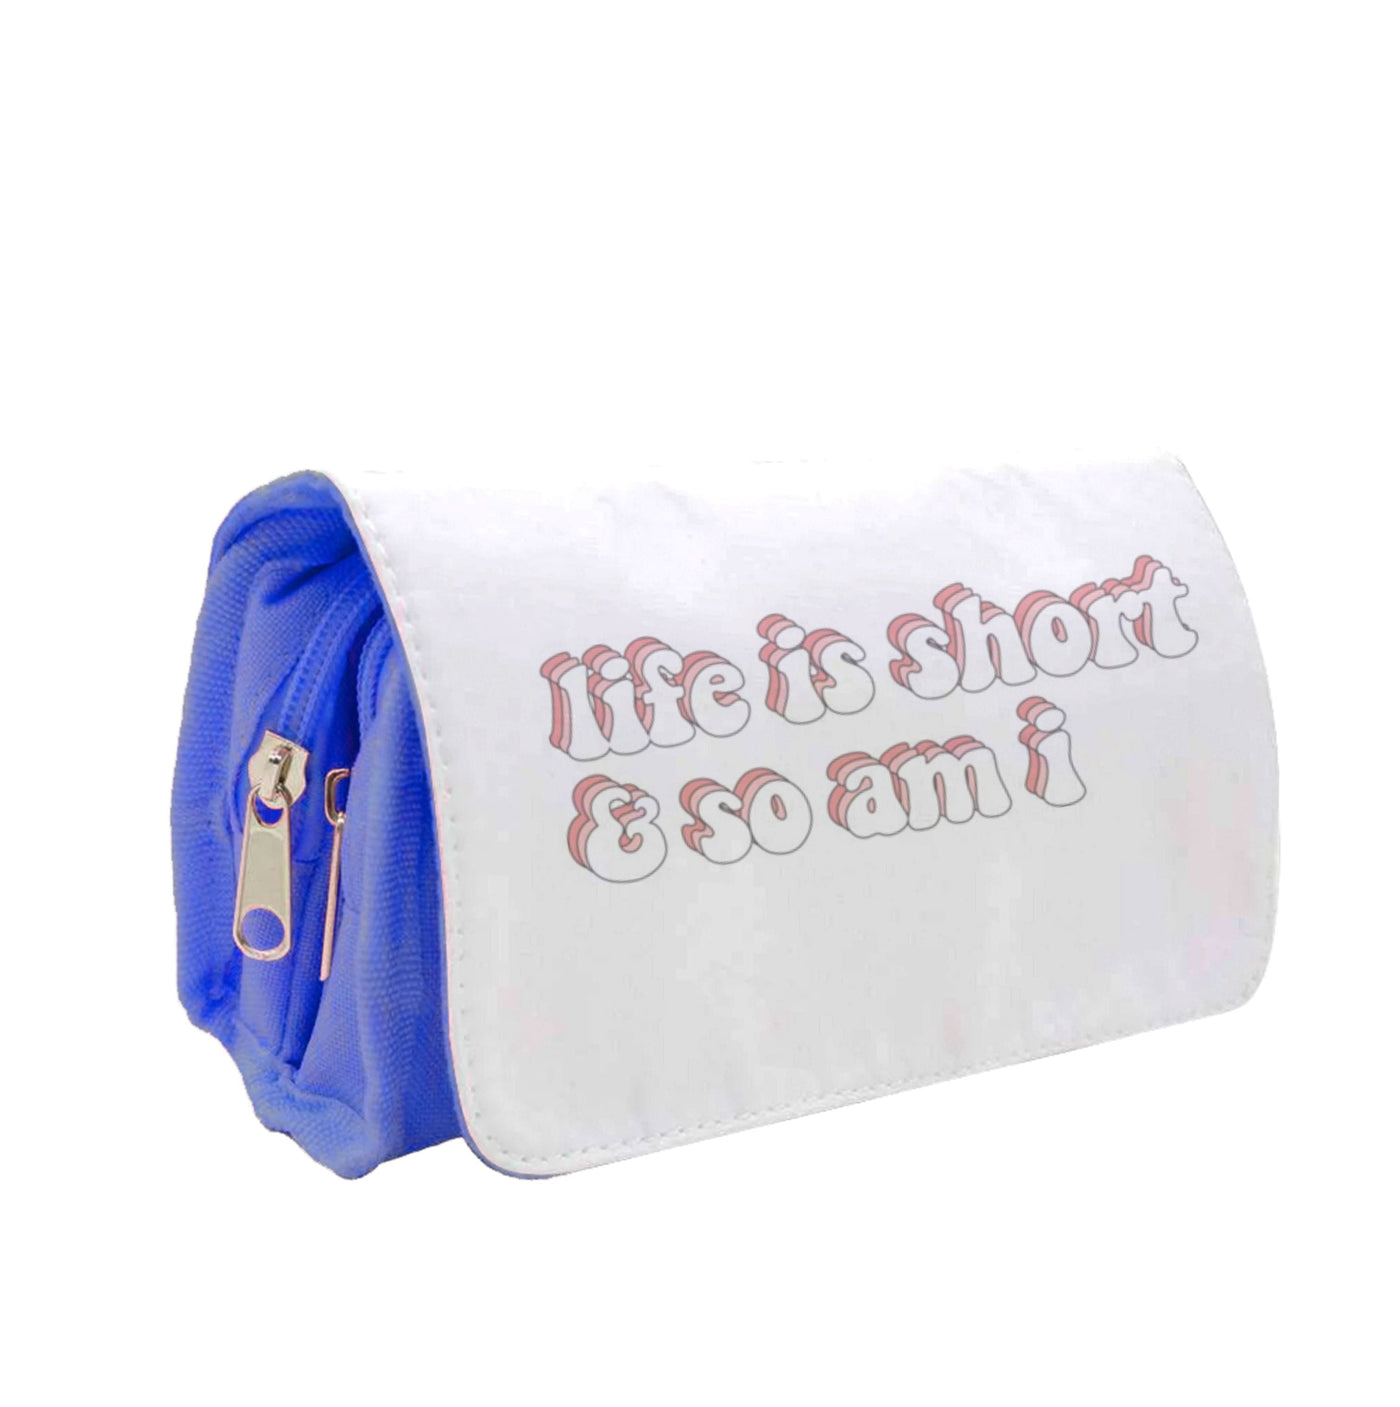 ife Is Short And So Am I - TikTok Pencil Case